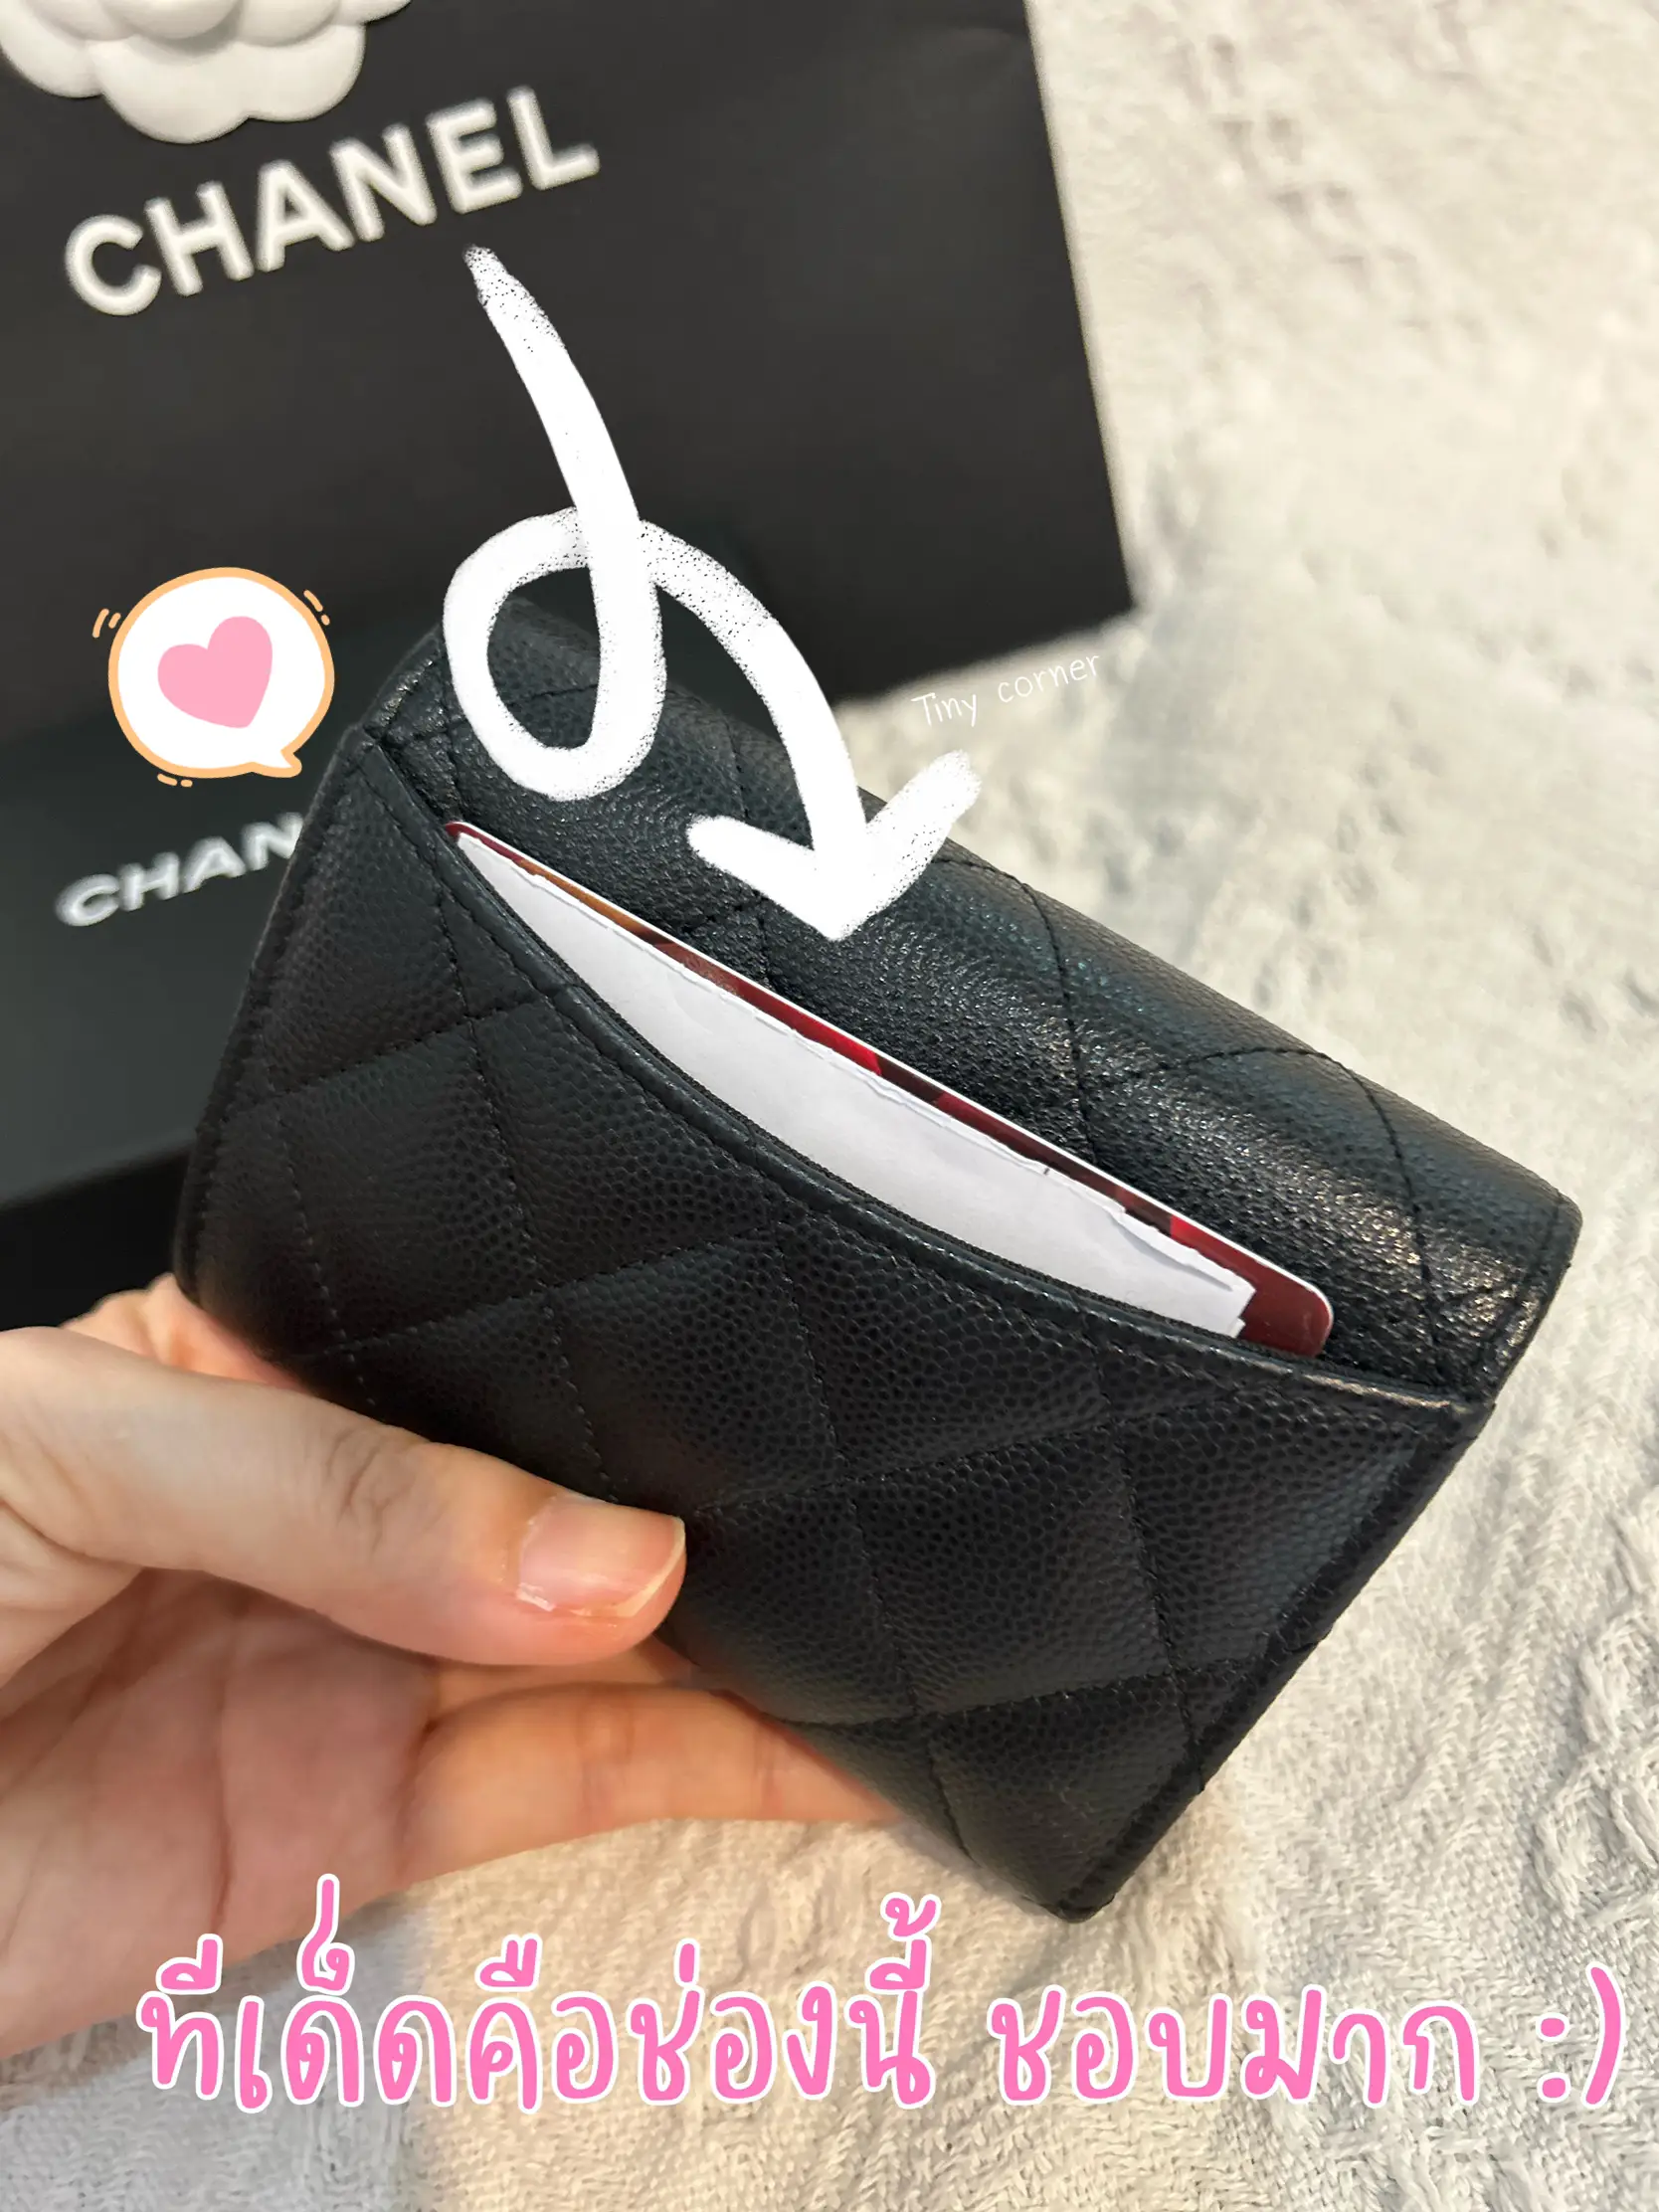 Card holder review size XL chanel brand